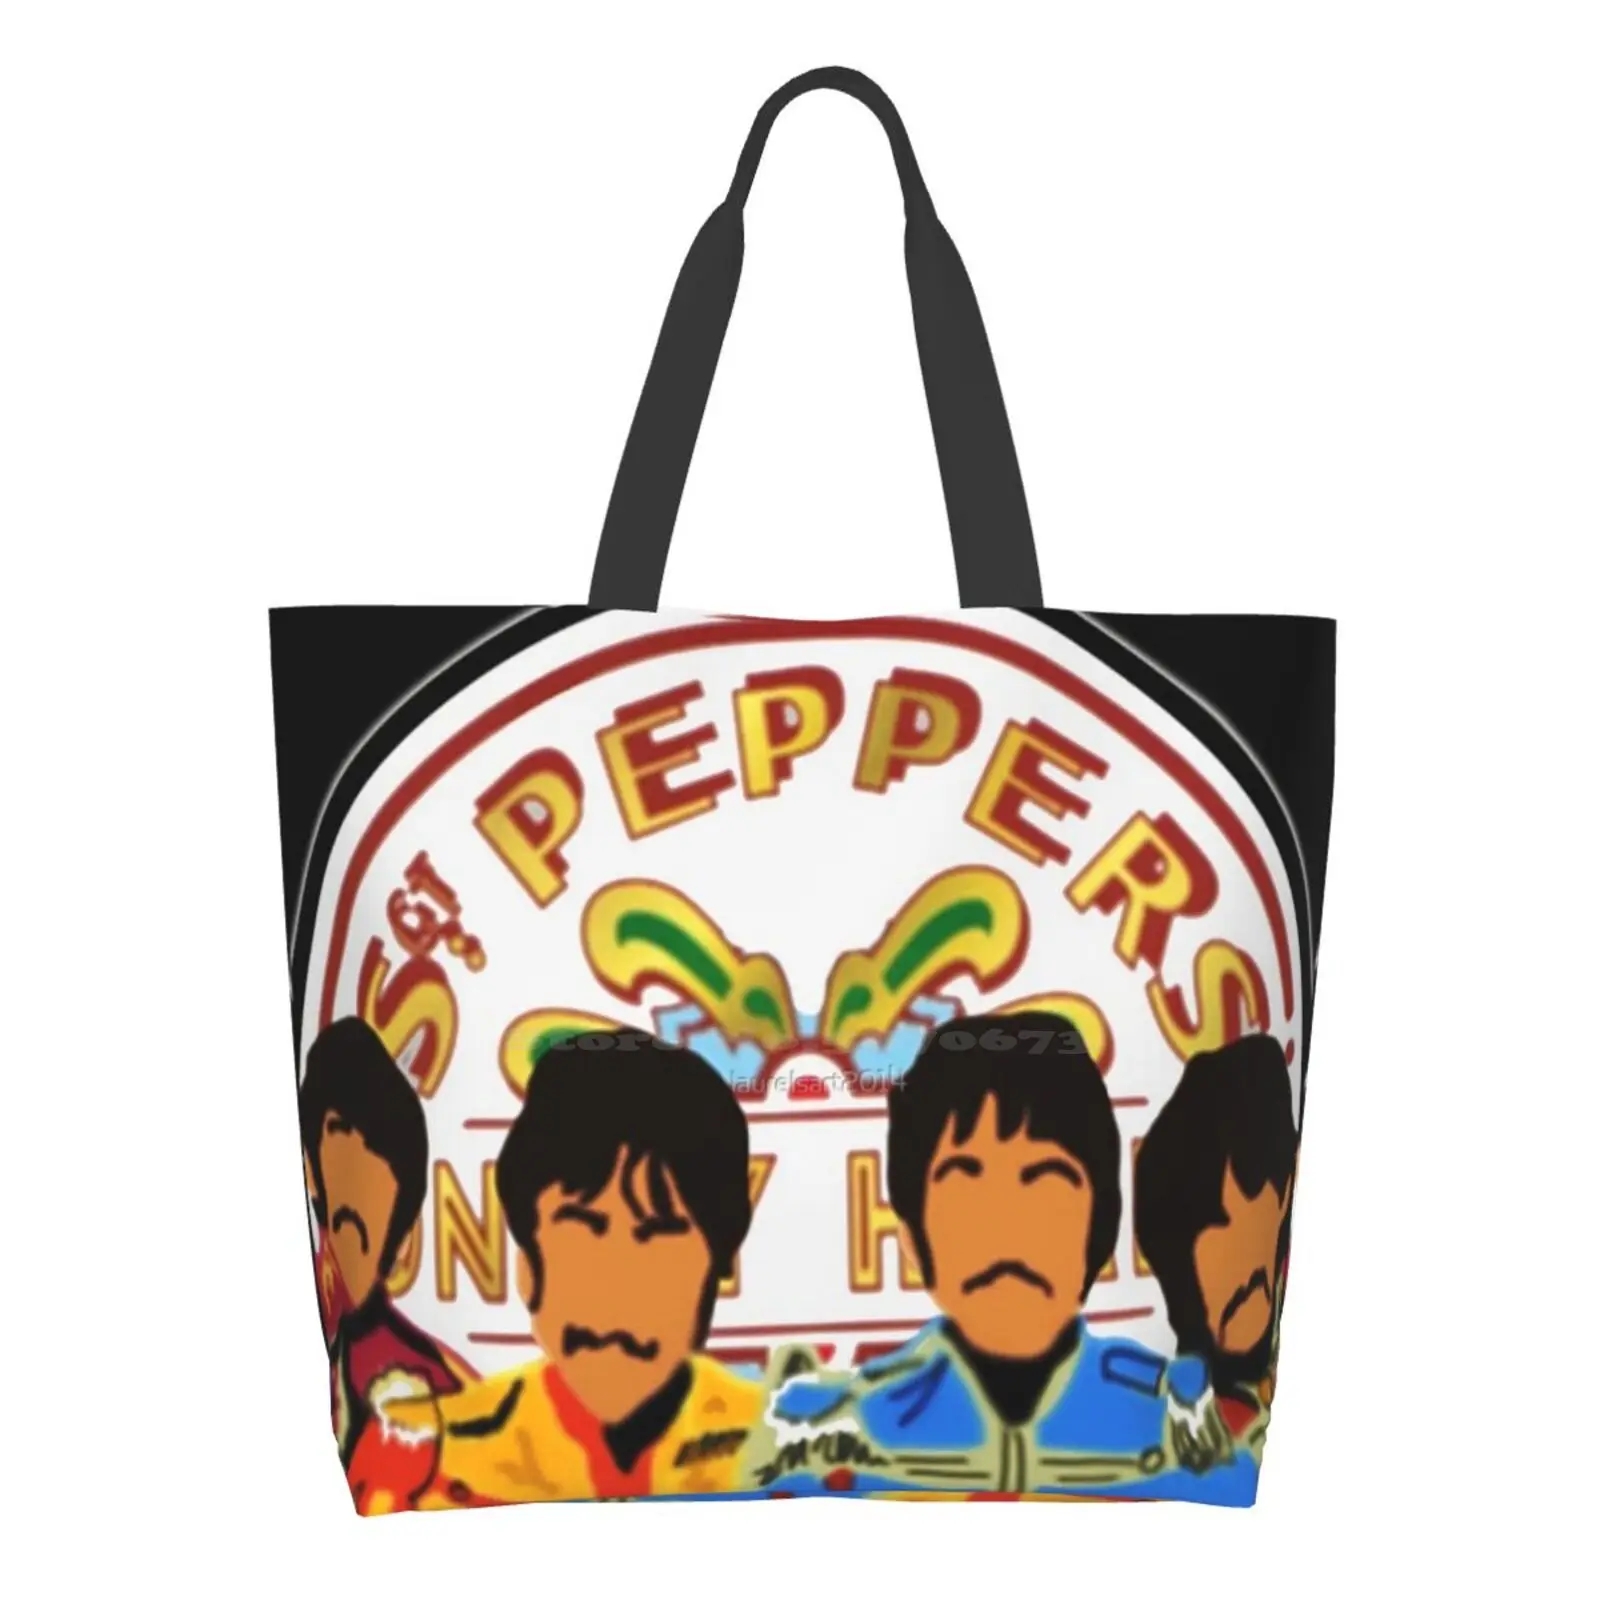 

Sgt Pepper Ladies Casual Handbag Tote Bag Reusable Large Capacity The Sergeant Pepper Lonely Hearts Club Band Sgt Pepper